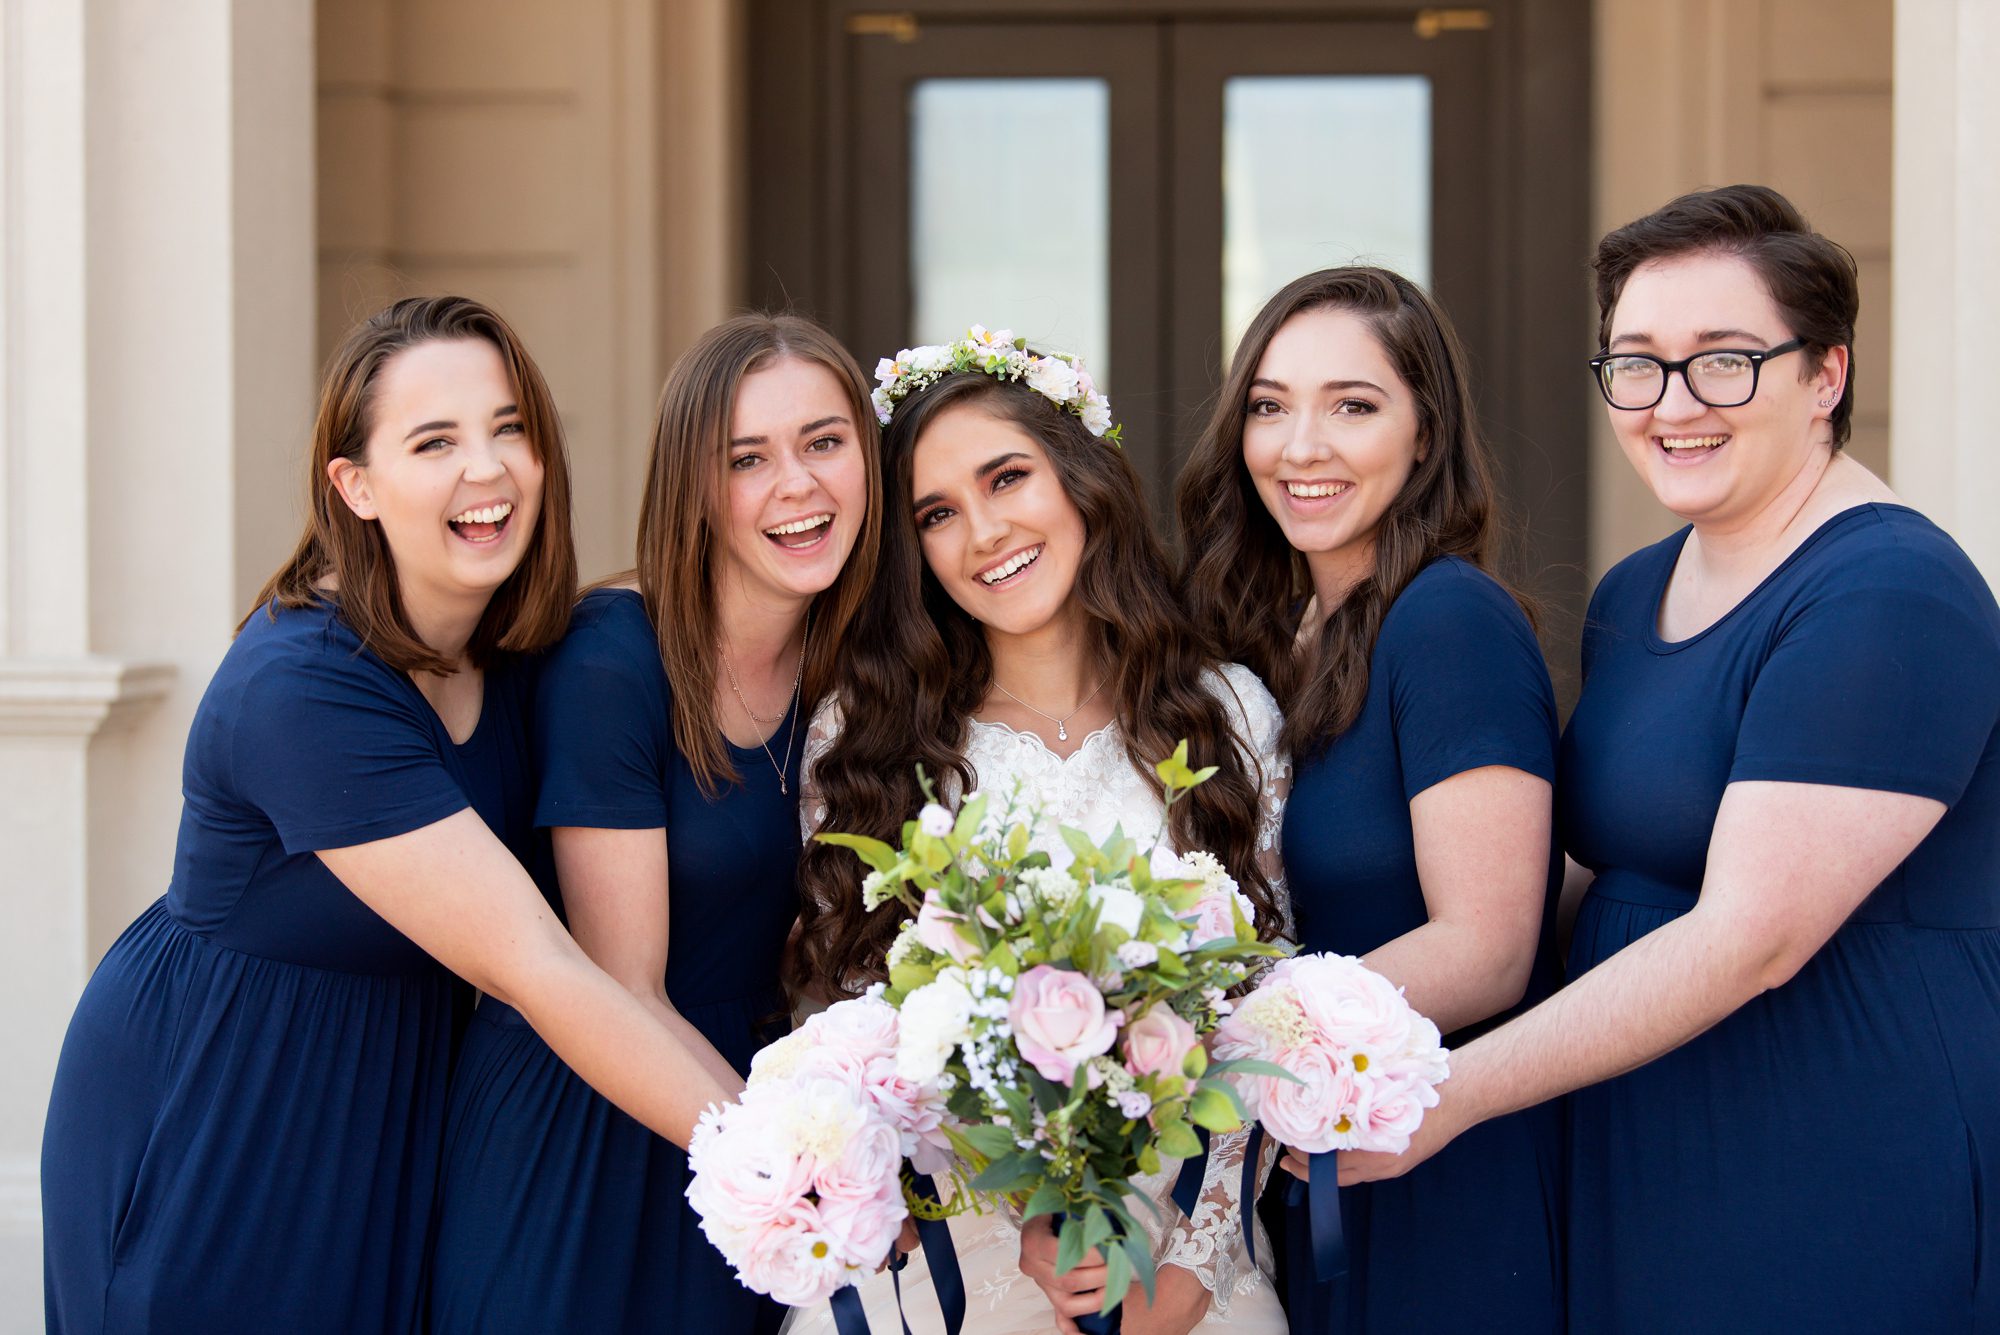 Fort Collins temple wedding photography and videography